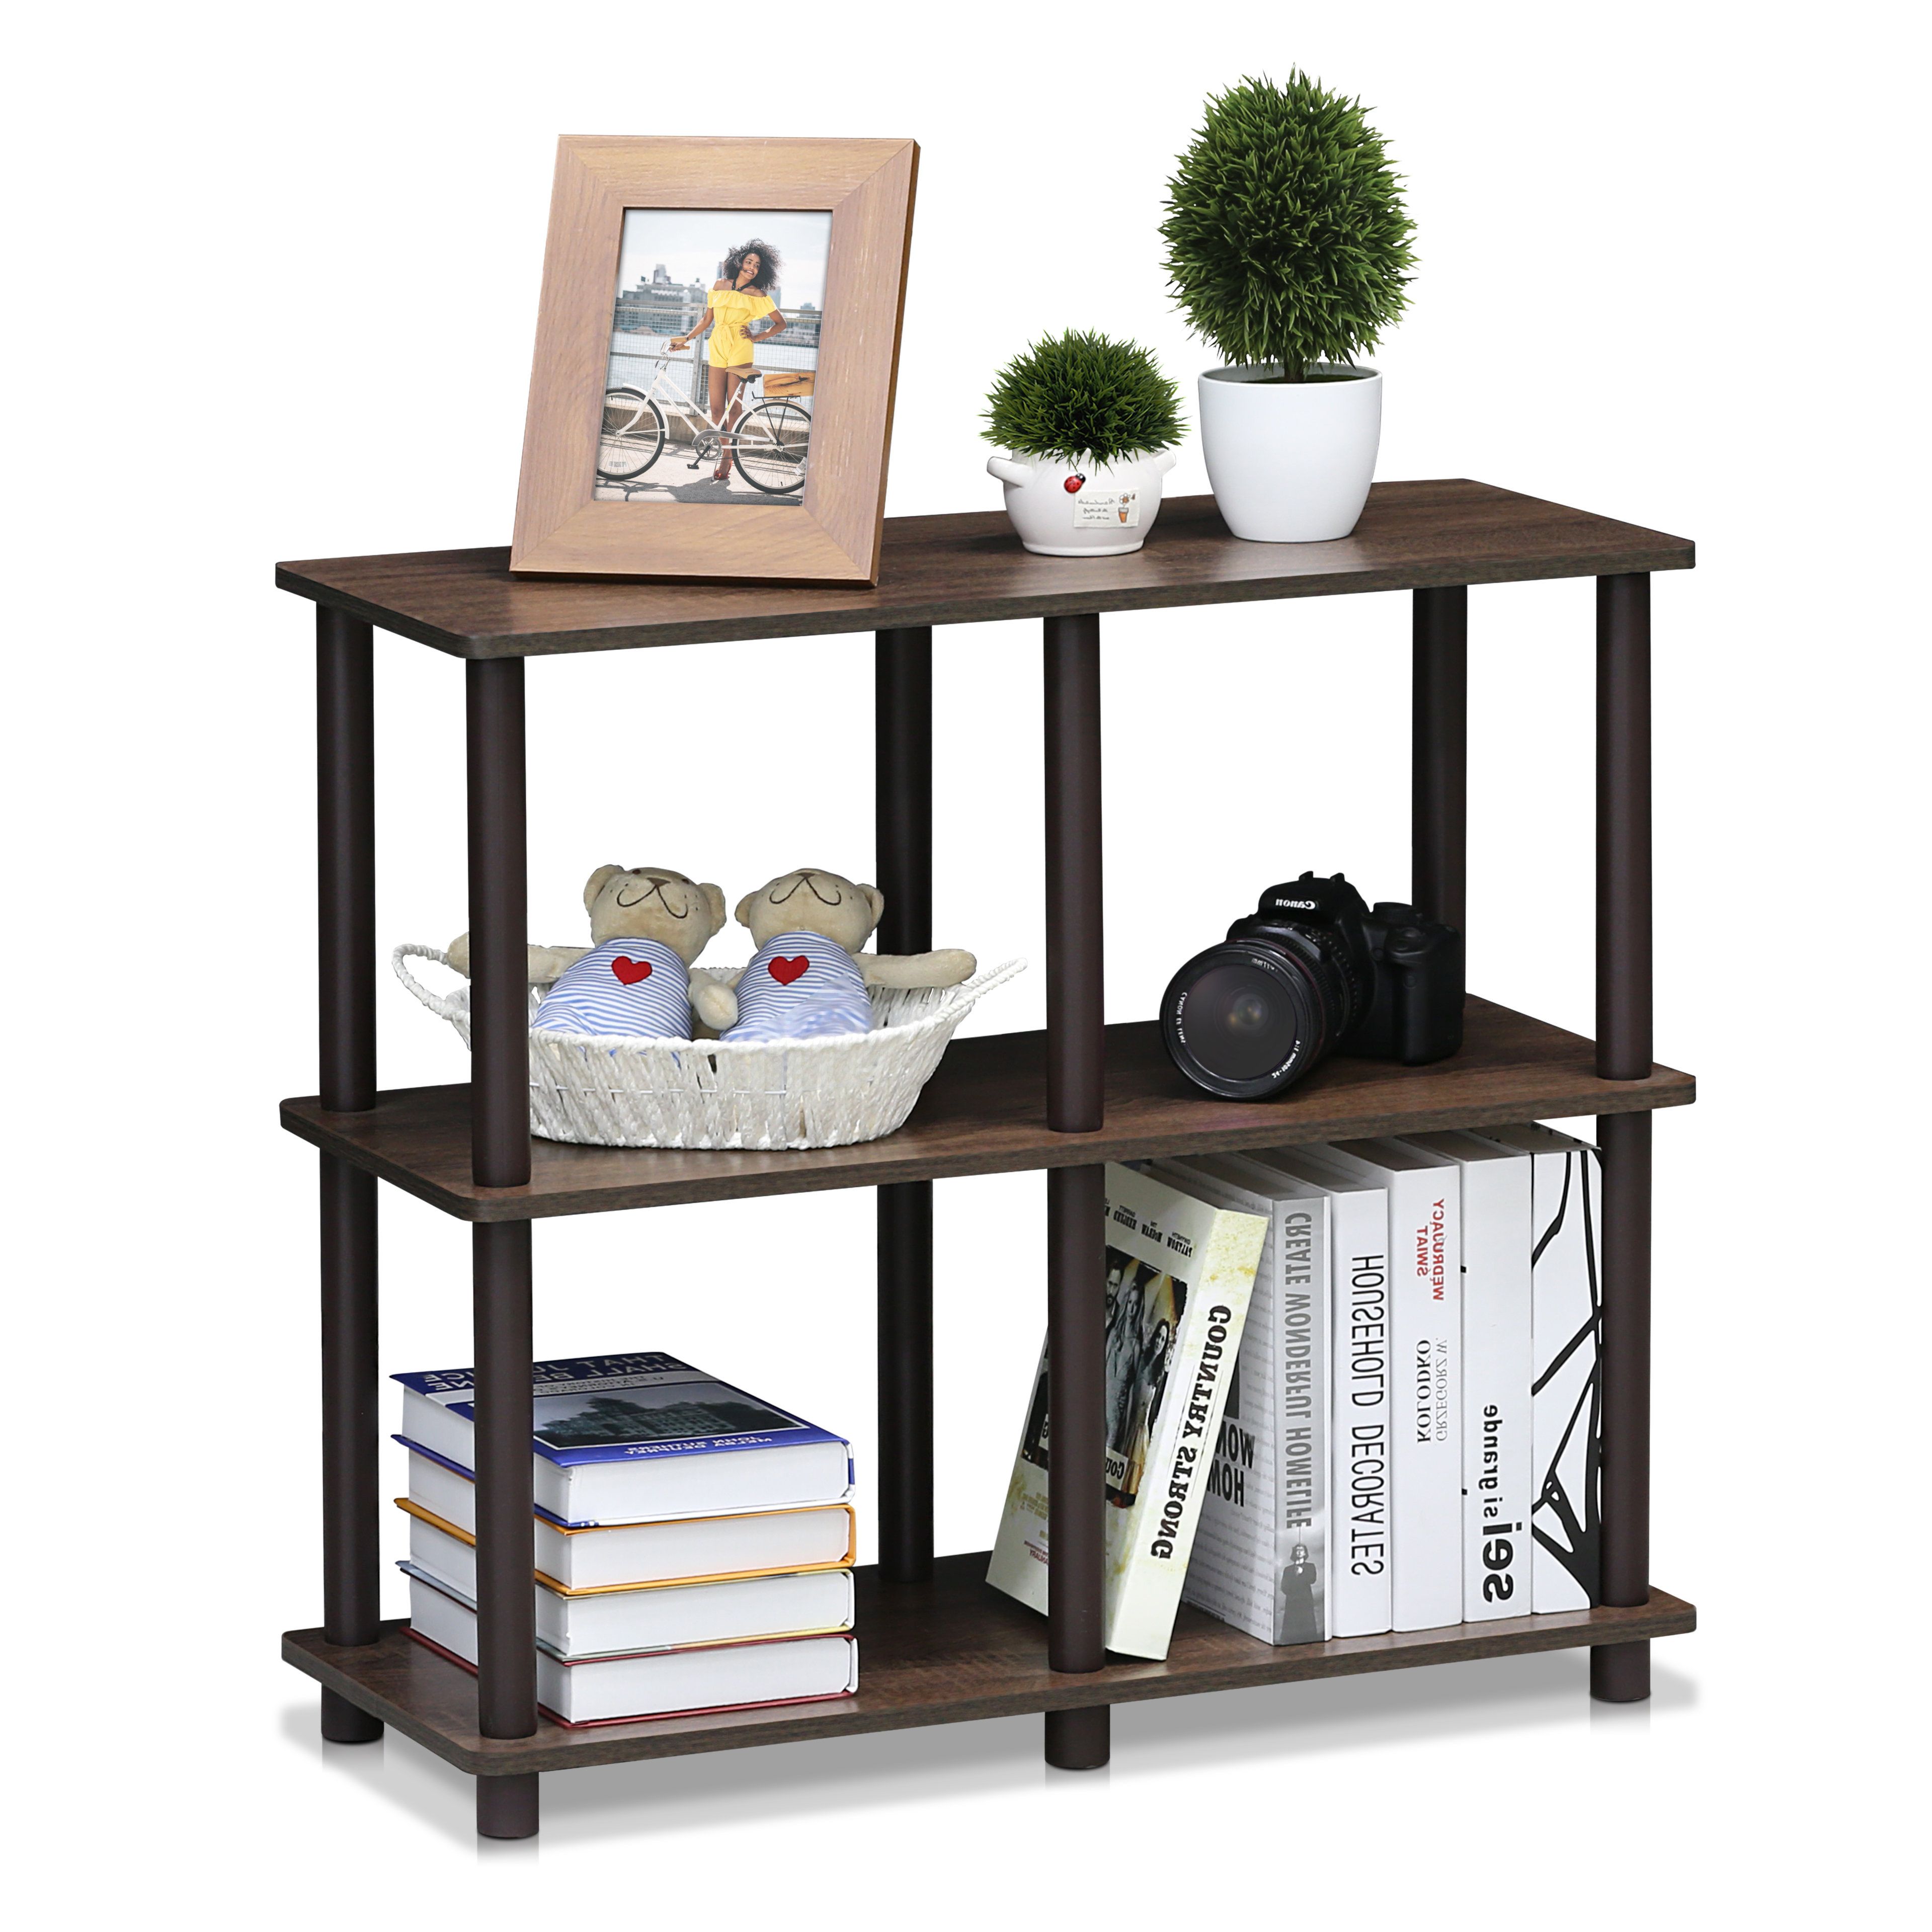 Beckett Etagere Bookcases Pertaining To Well Known Laurent Etagere Bookcase (View 10 of 20)